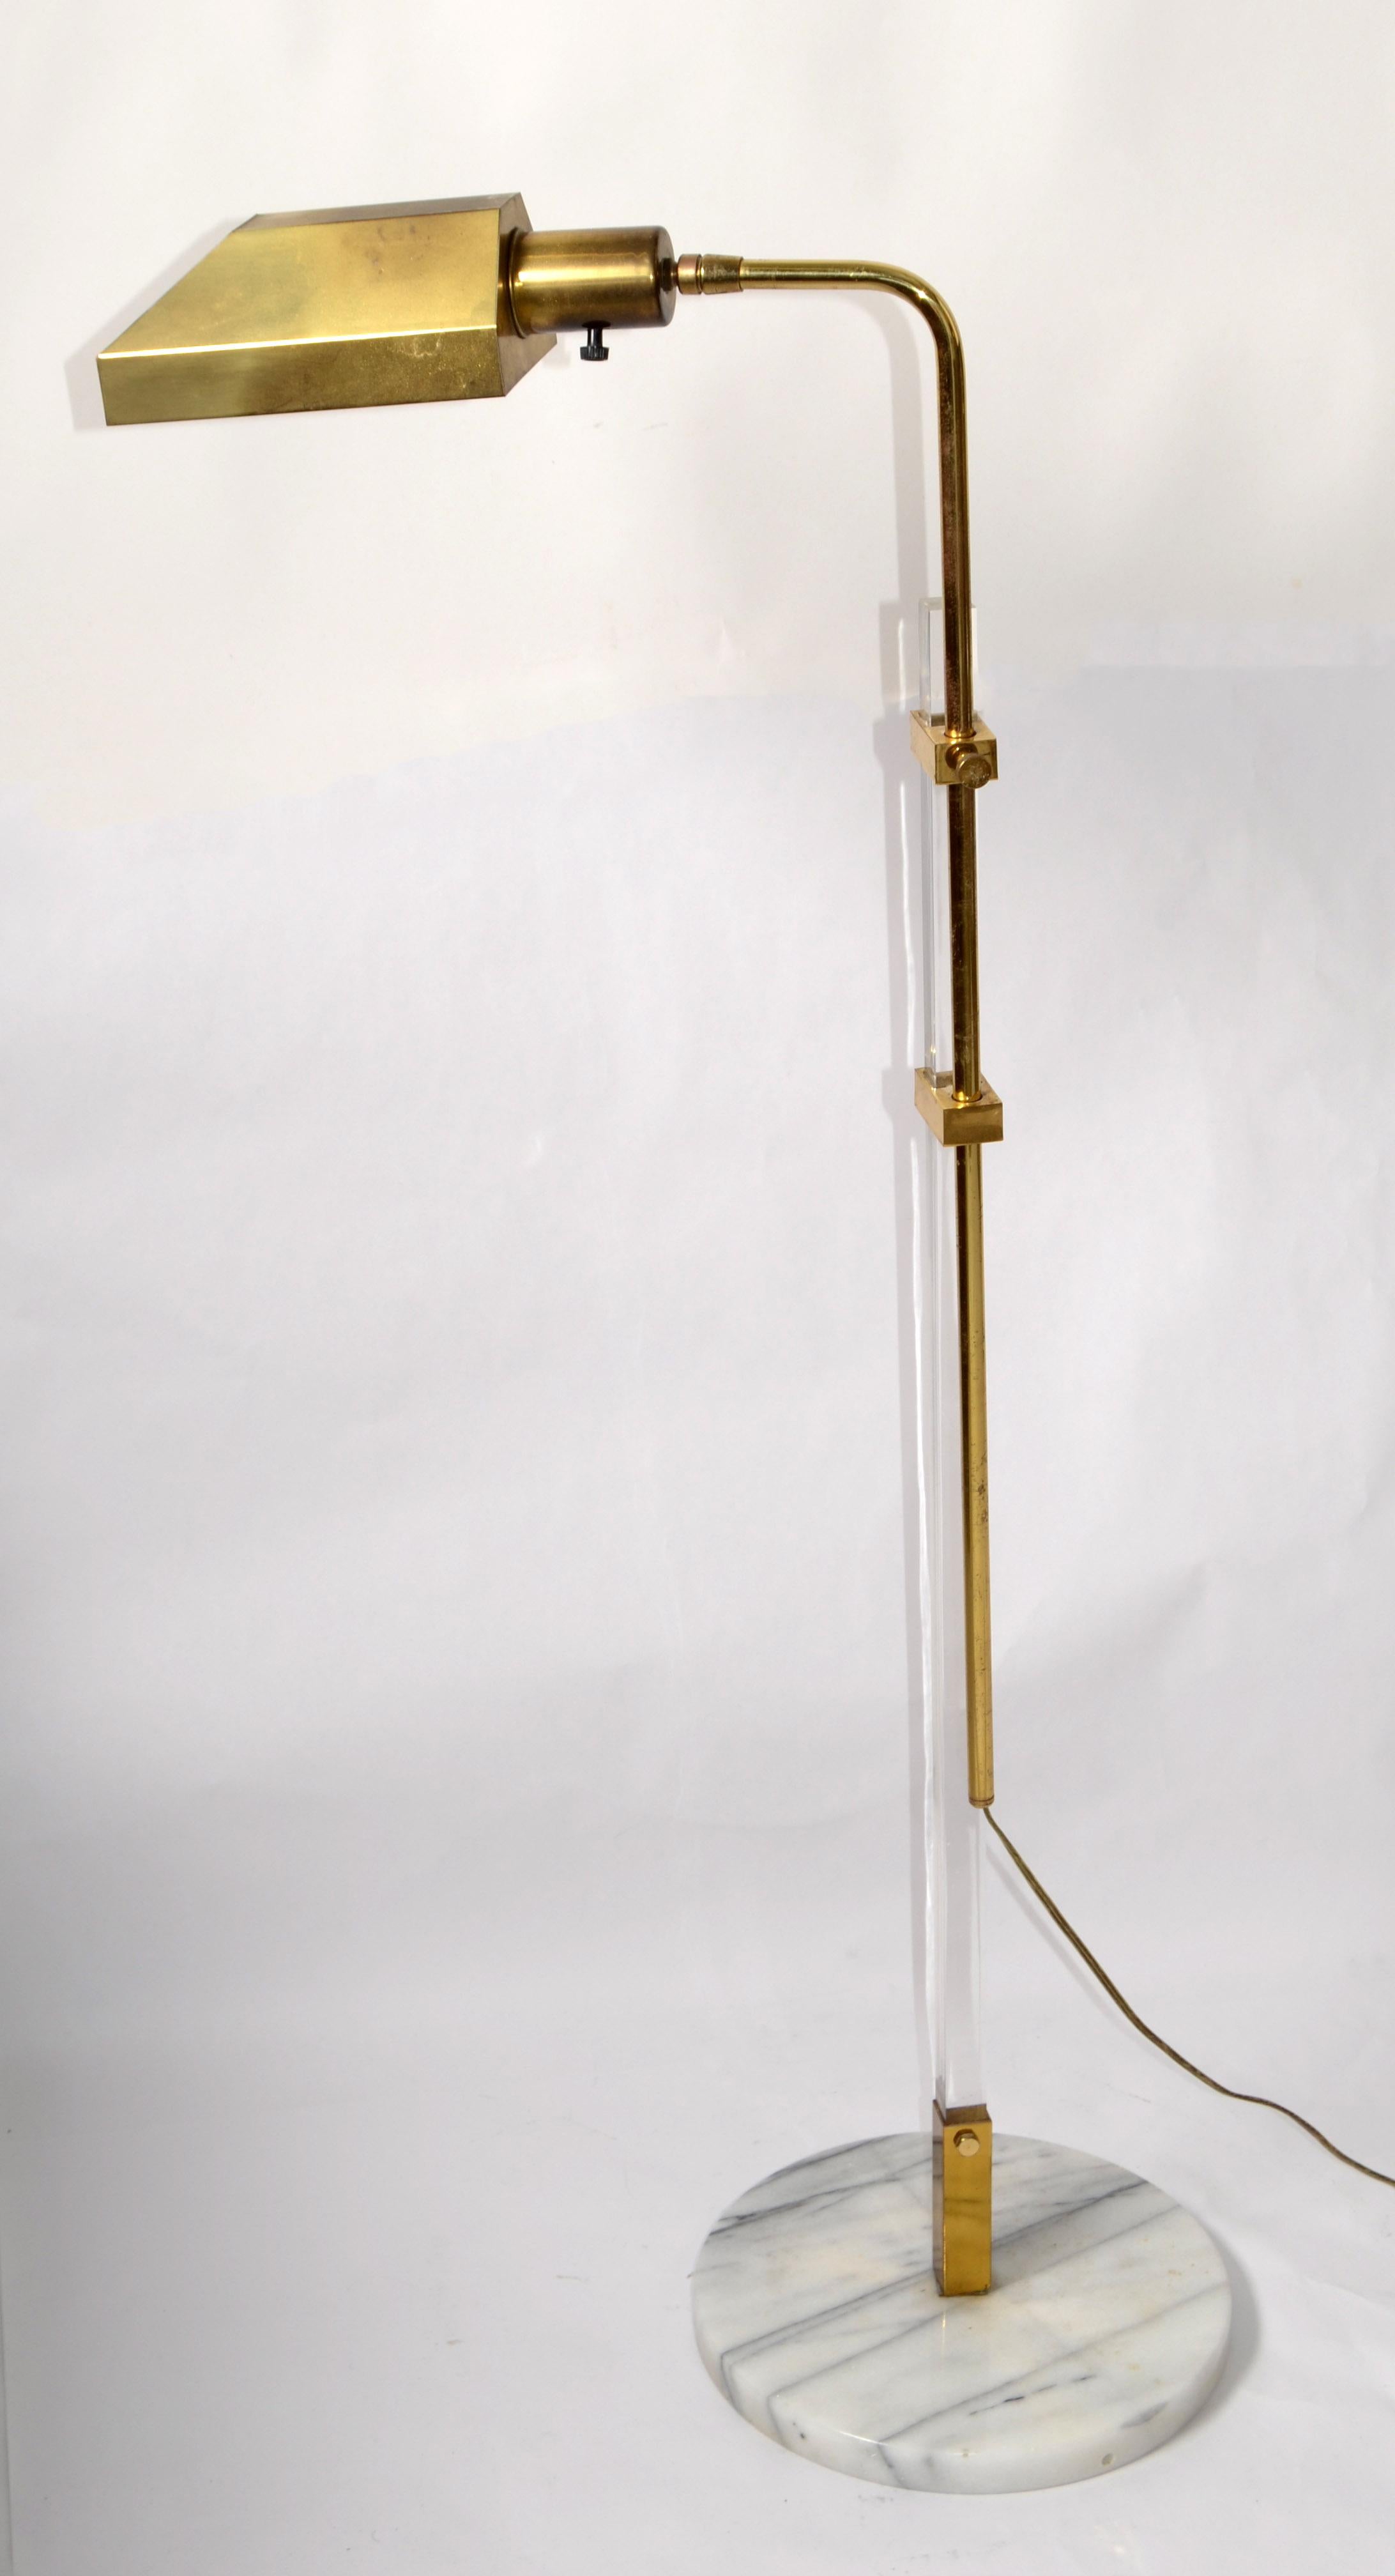 Italian 18 inches adjustable Floor Lamp of Lucite and Brass. The Lamp features a rectangular vertical shaft of solid transparent Lucite on a round white-gray marble base, which is coupled with an adjustable tubular brass vertical shaft.
In perfect